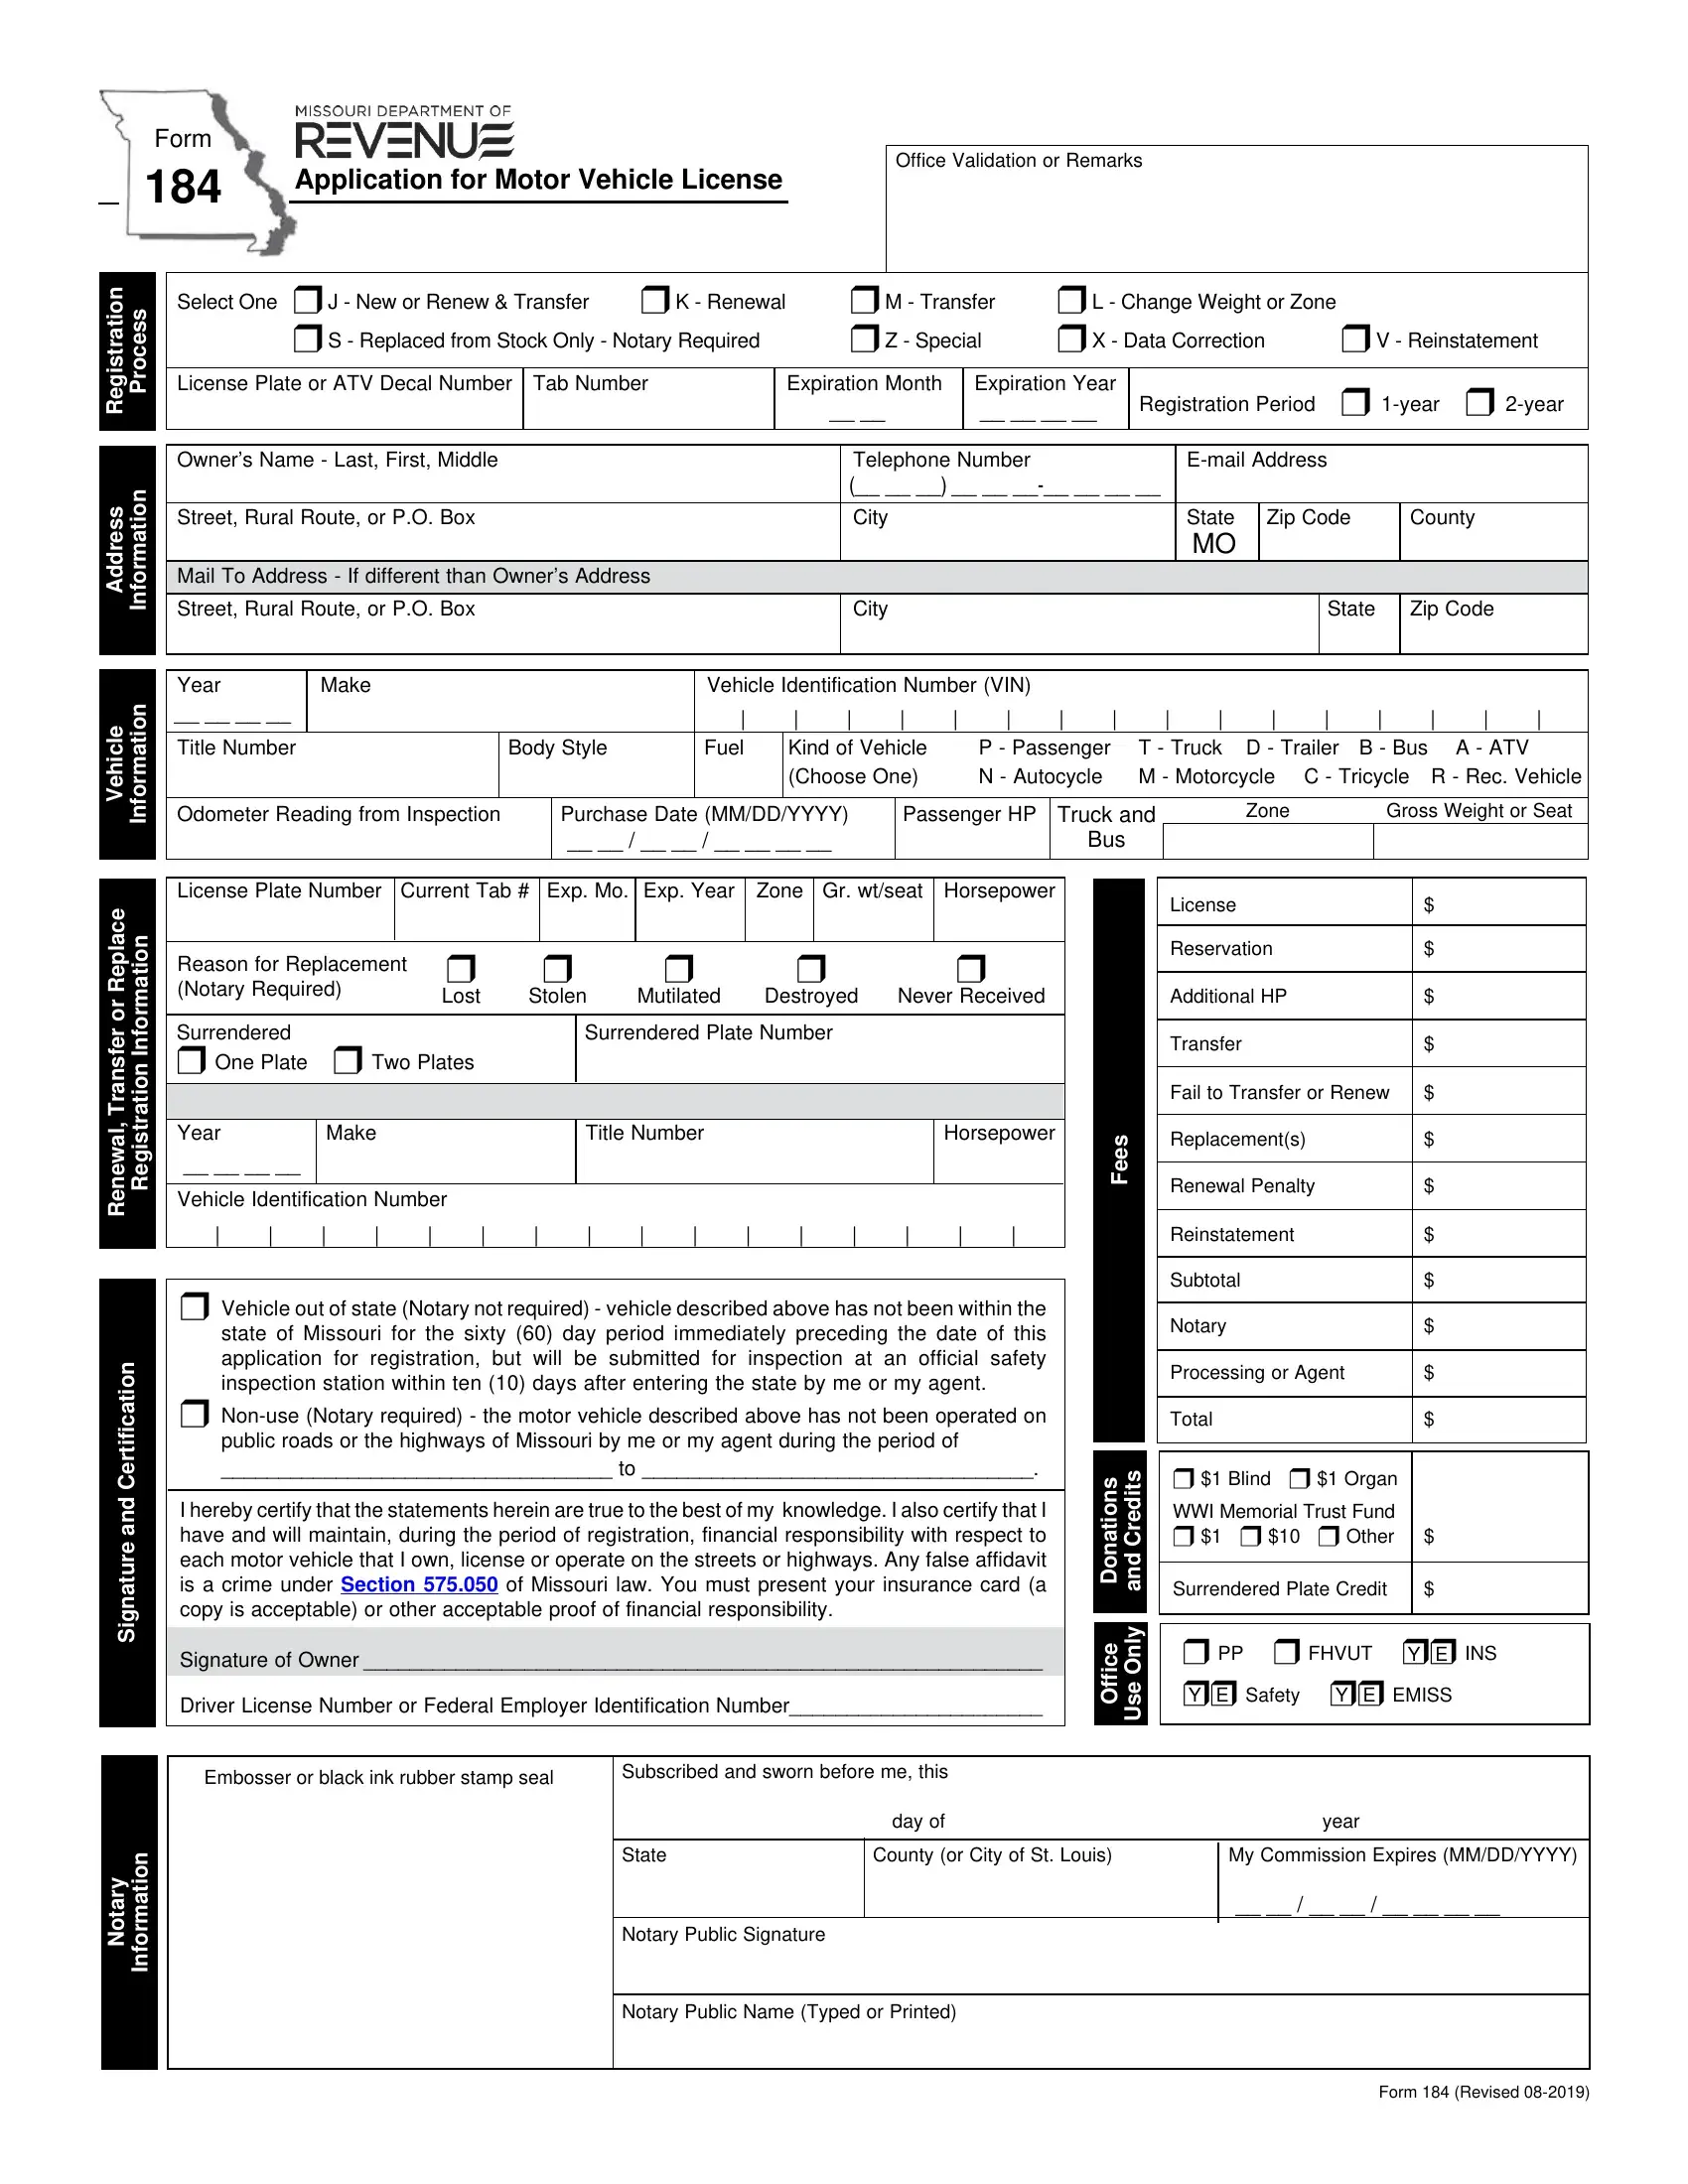 Form 184 Preview